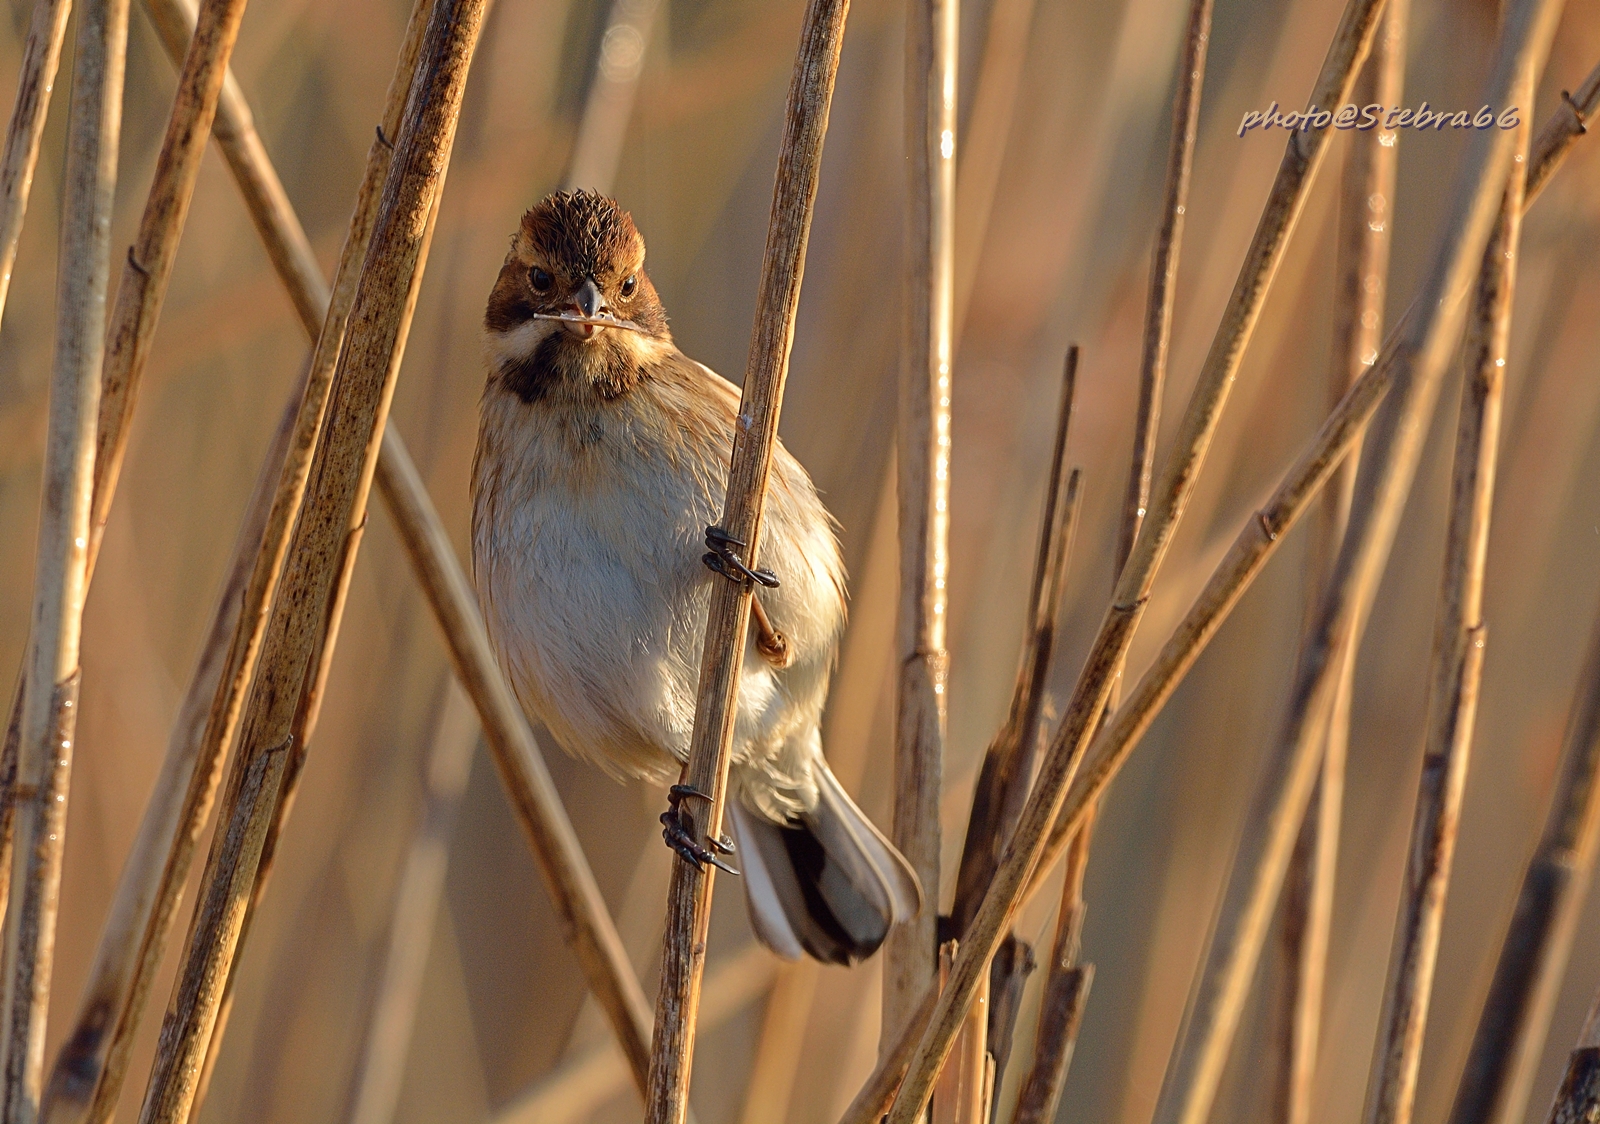 Among the reeds...